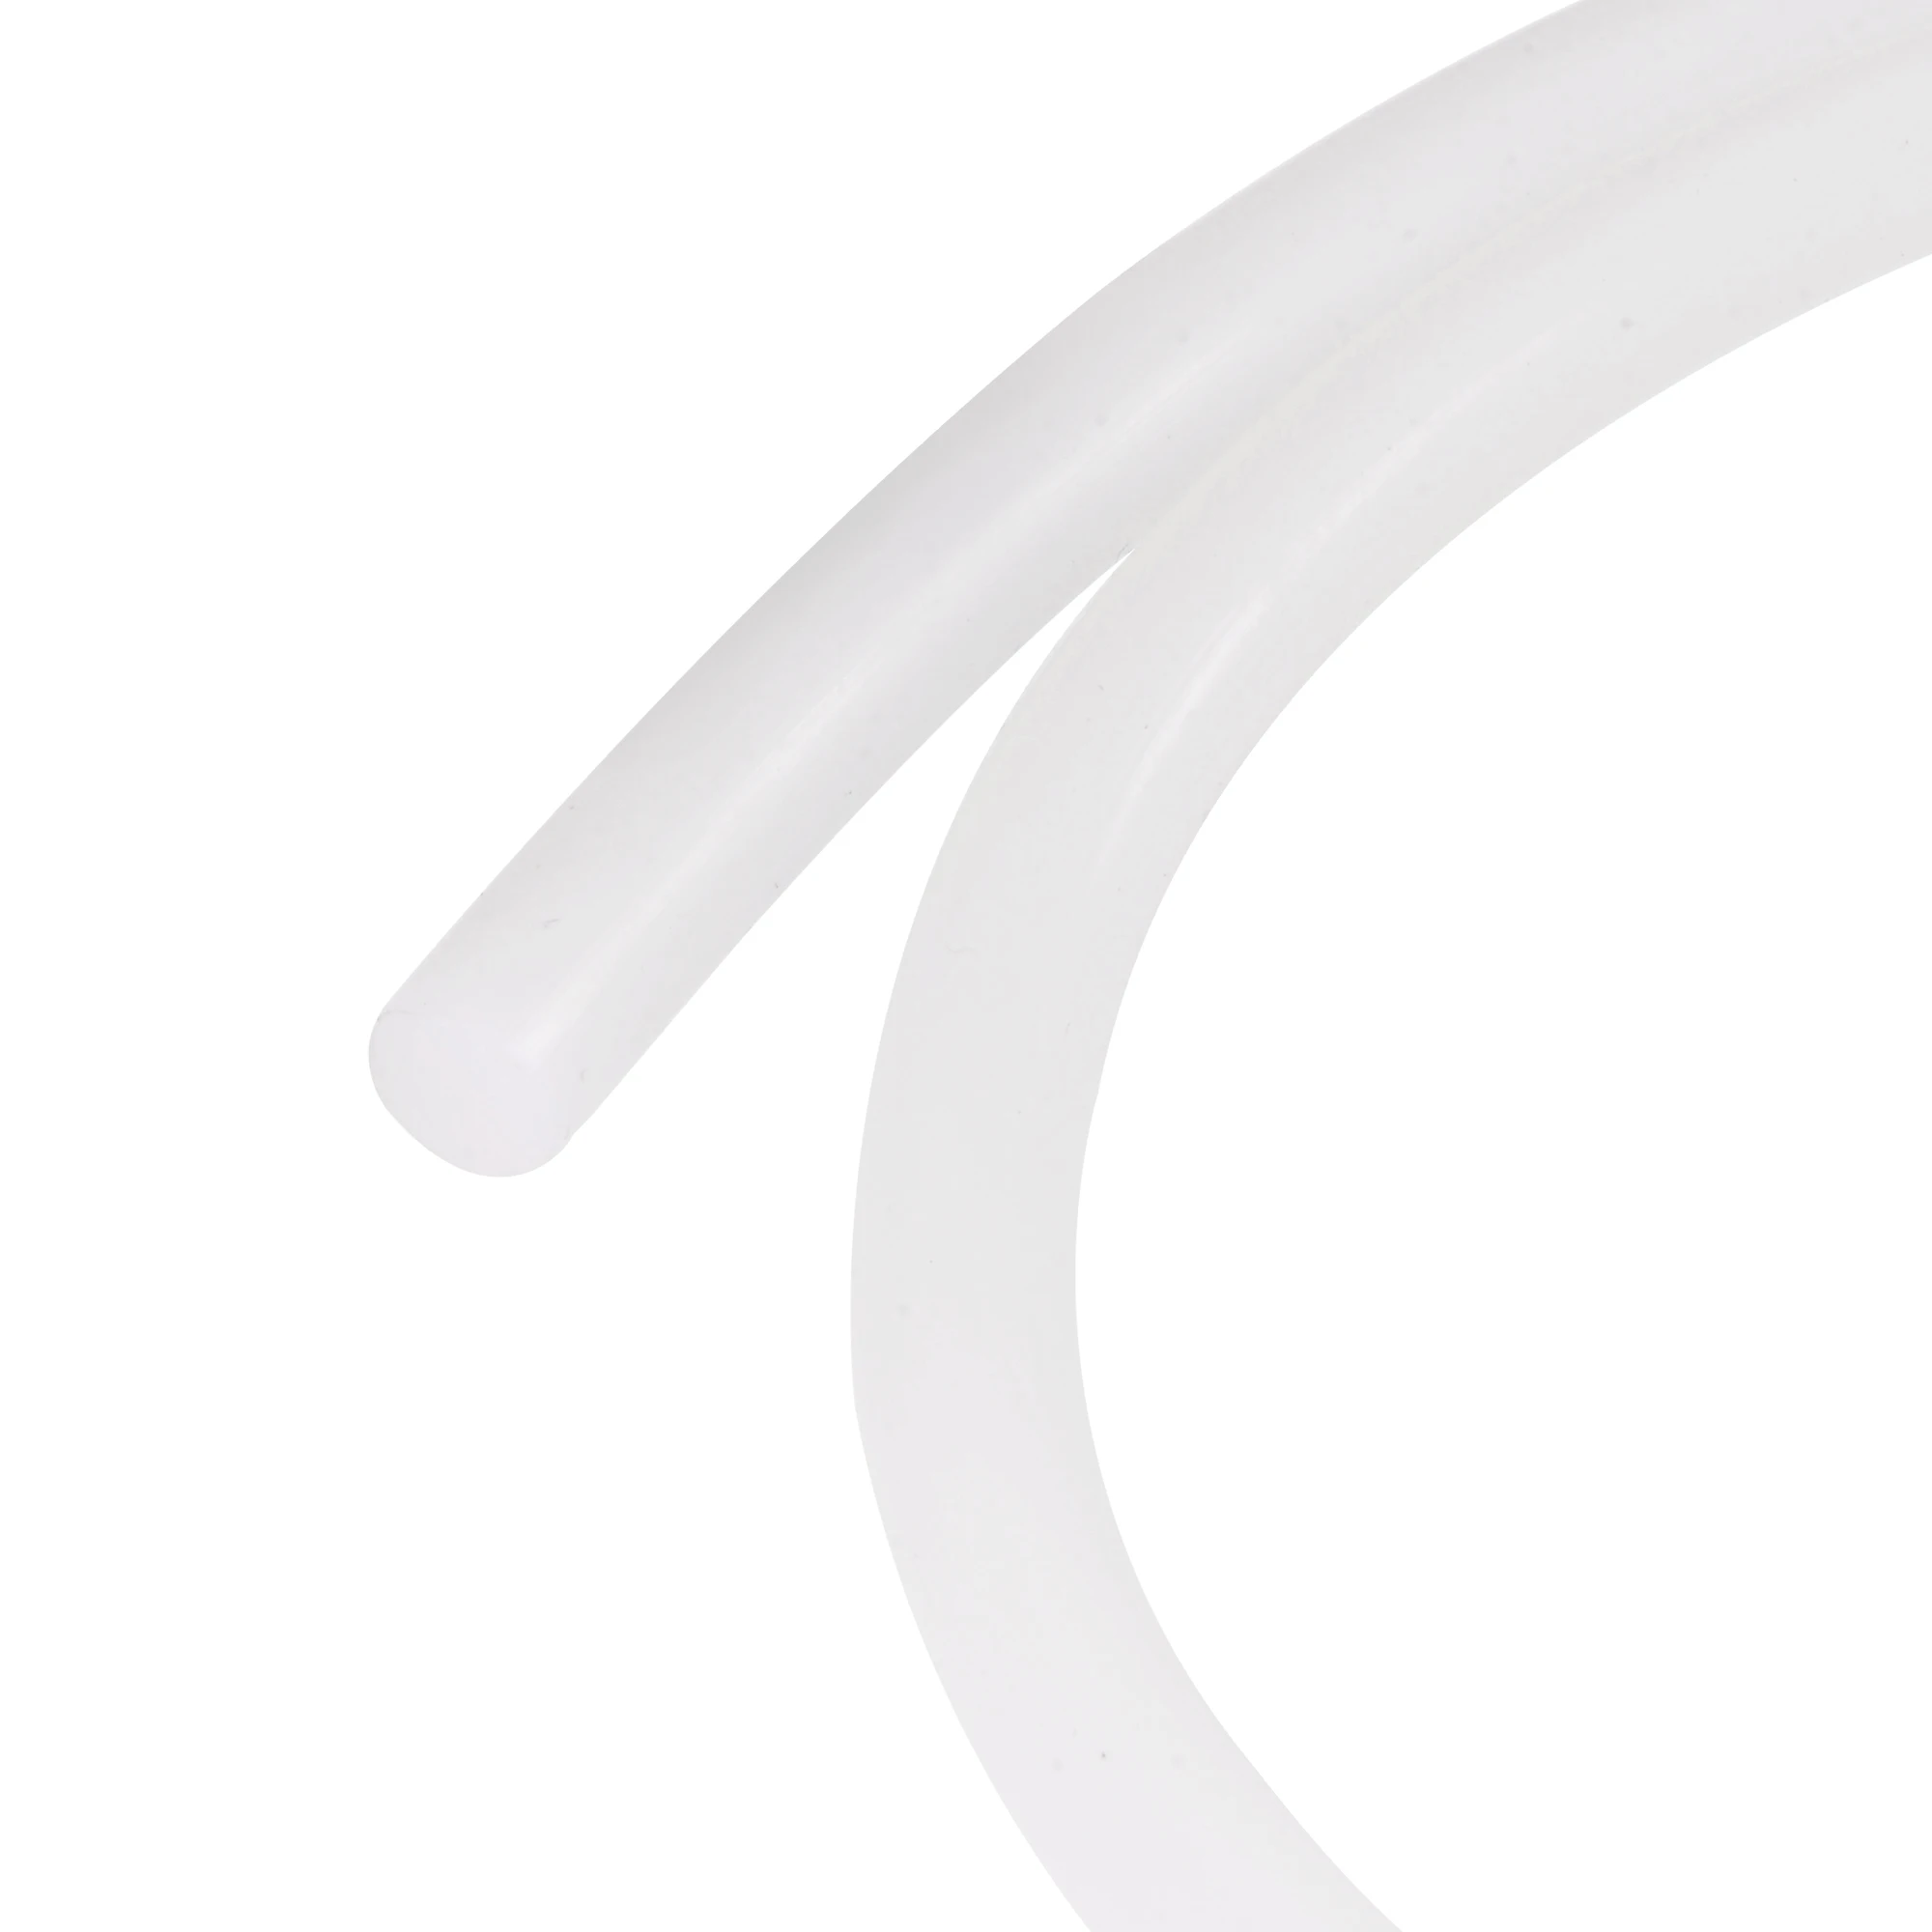 Uxcell Silicone Bending Insert Hard Tube 3/8 5ft White Soft for Rigid PETG Tubing Water Cooling bykski b yklwp petg pmma acrylic hard tube od 12mm 14mm 16mm 50cm length 2mm thickness rigid pipe for pc water cooling